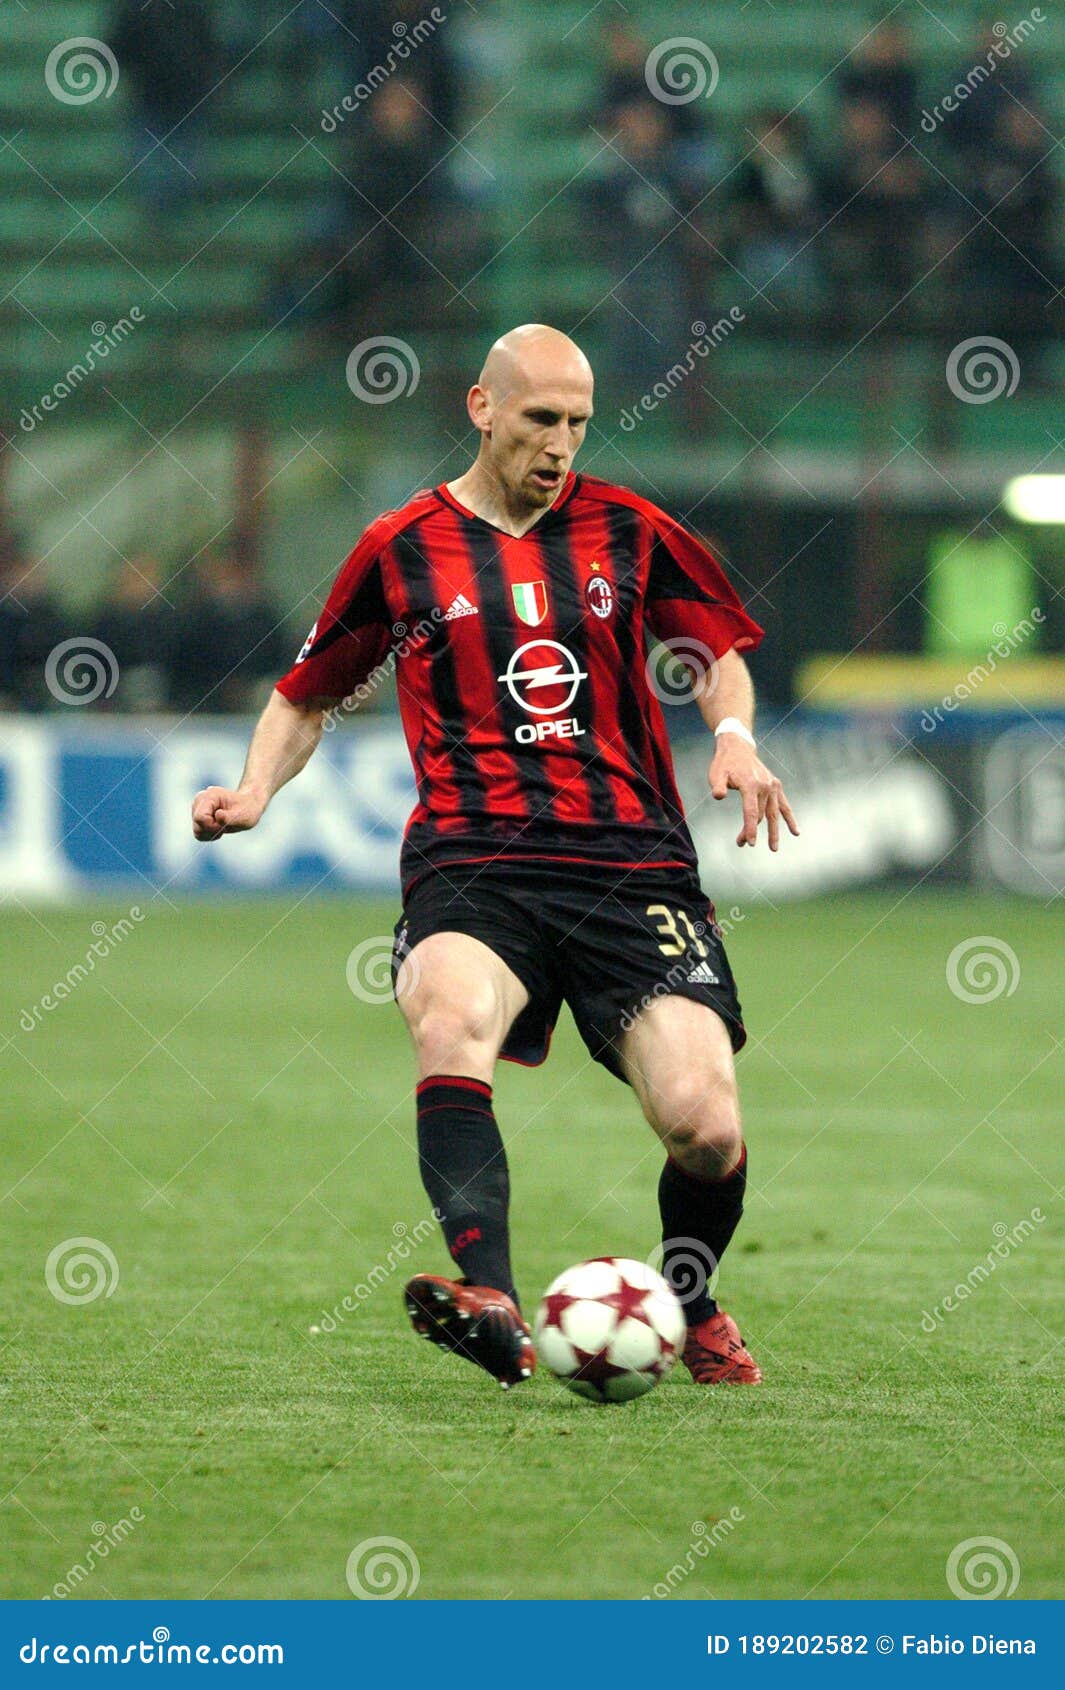 Stam in Action during the Match Editorial Photography - Image of match: 189202582